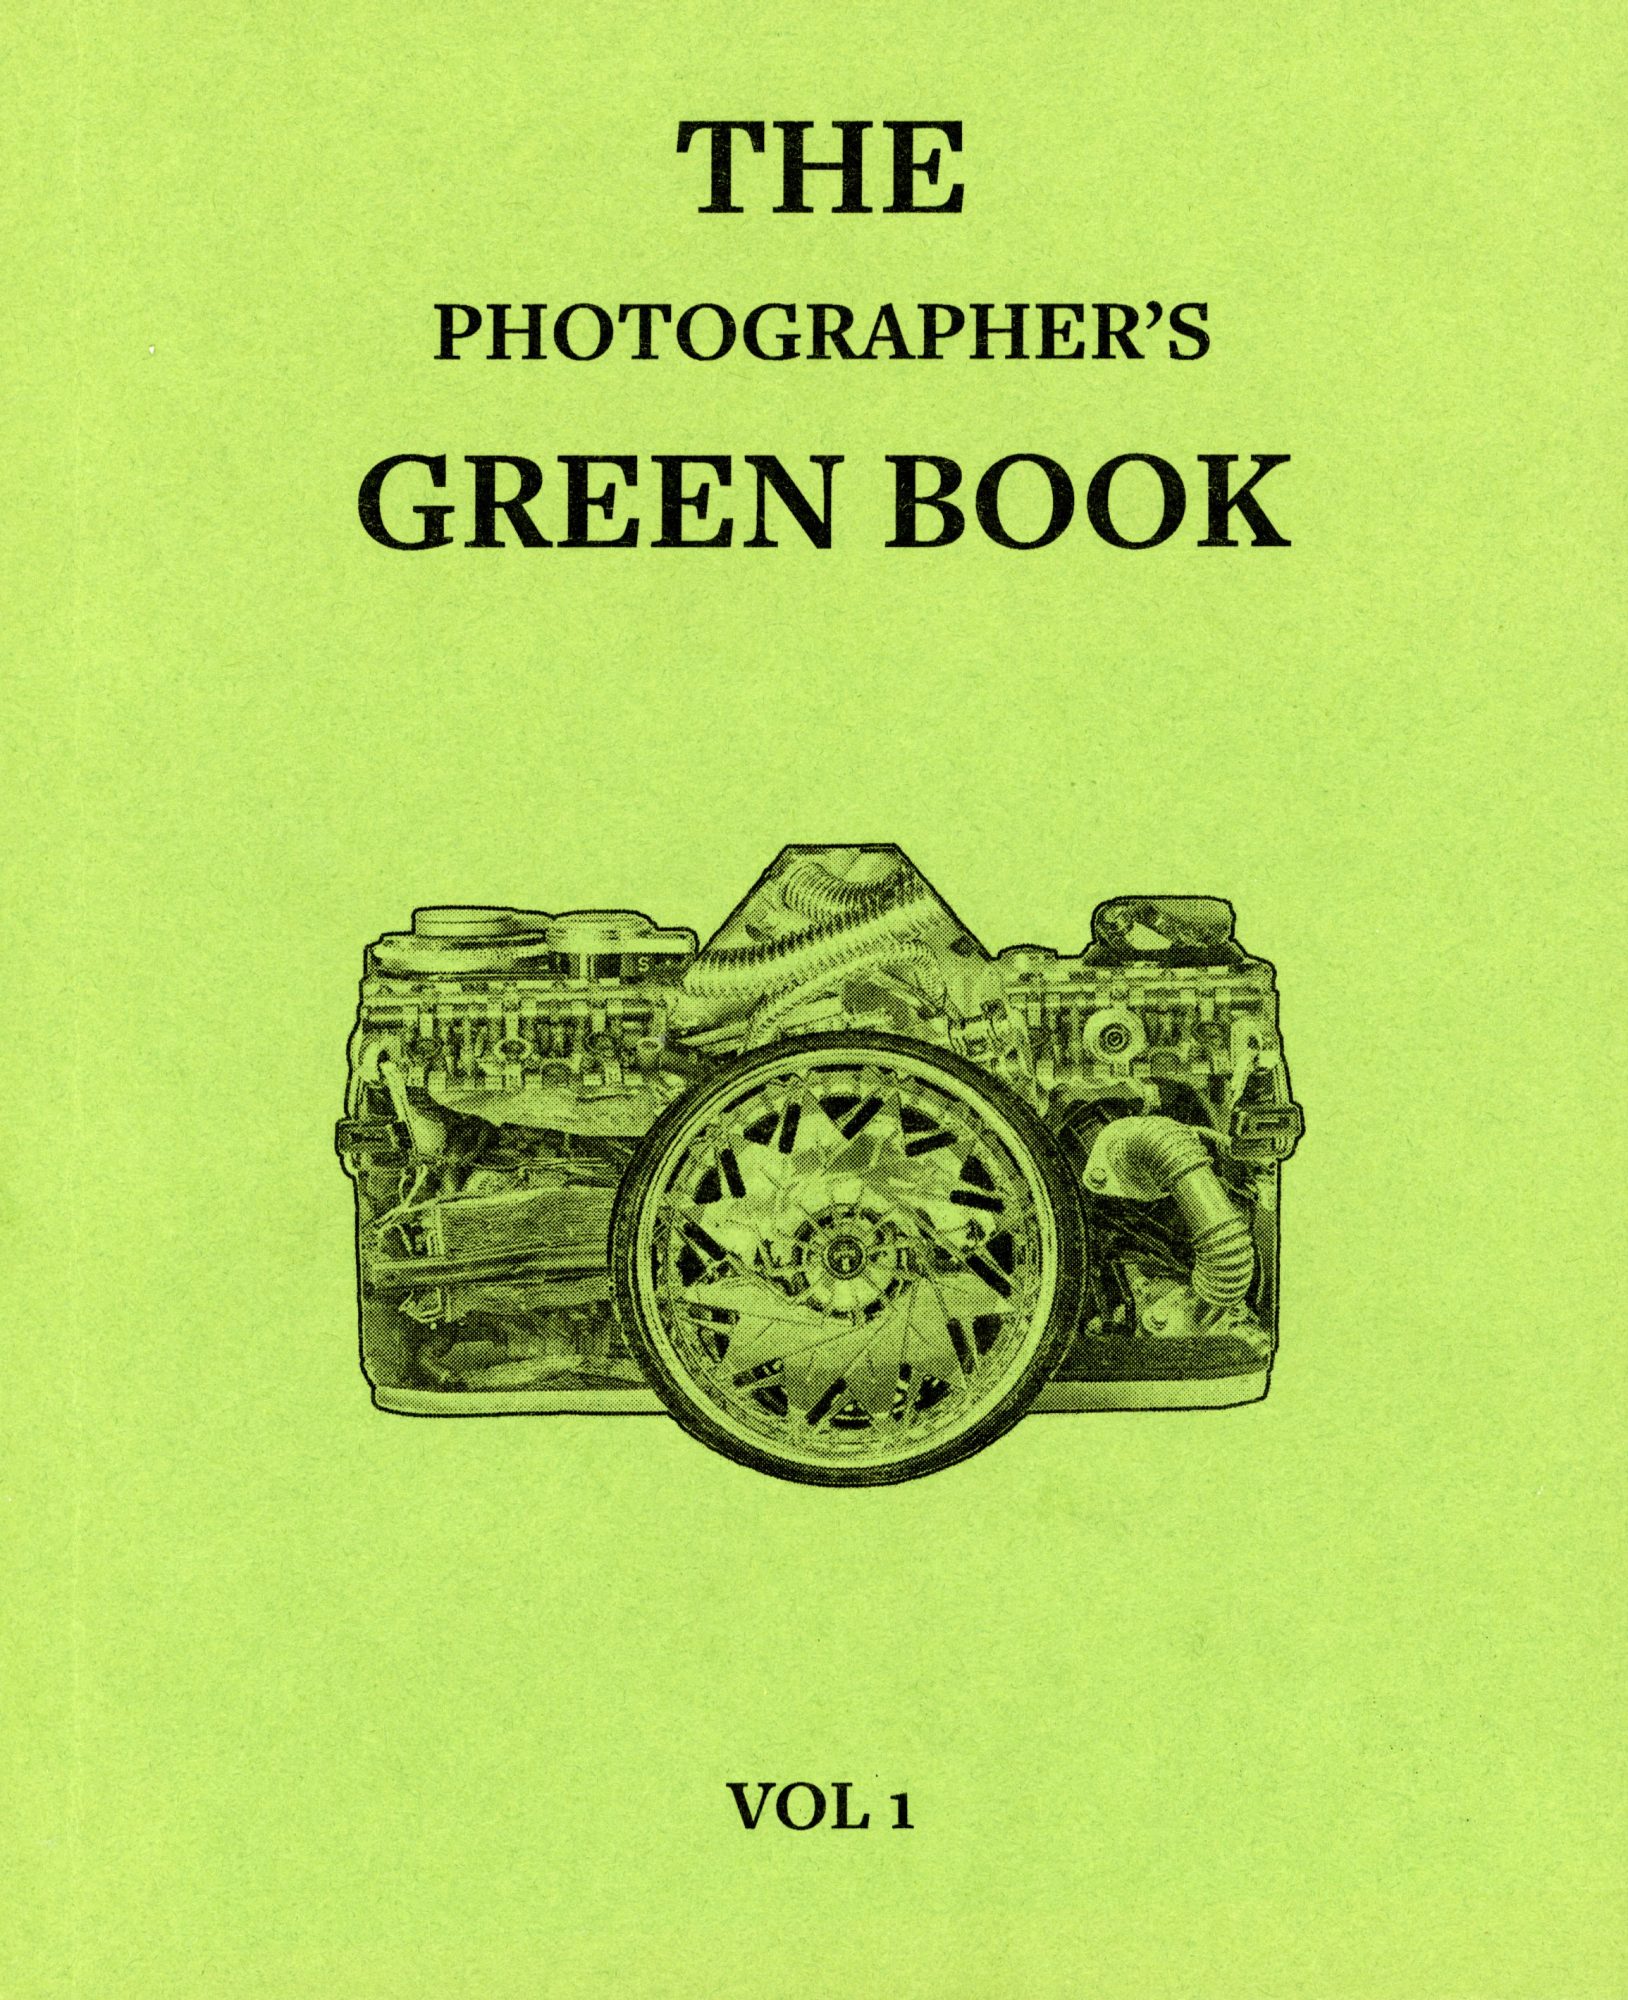 The Photographer's Green Book: Vol. 1